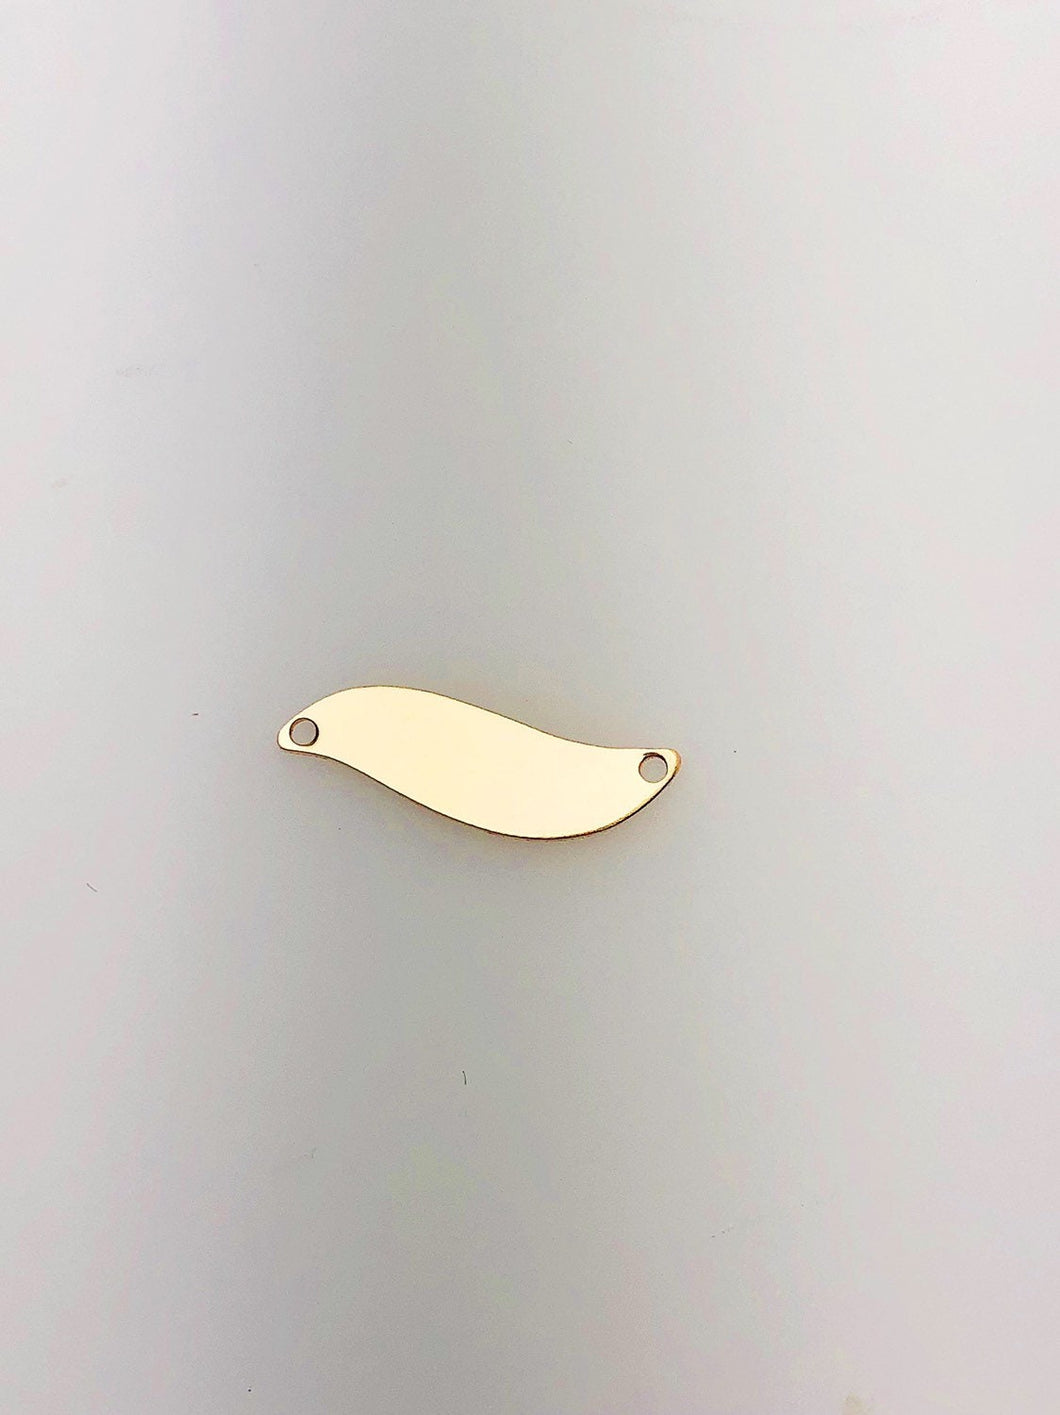 14K Gold Fill Curved Tag Charm w/ Two Holes, 6.1x20.2mm, Made in USA - 2452